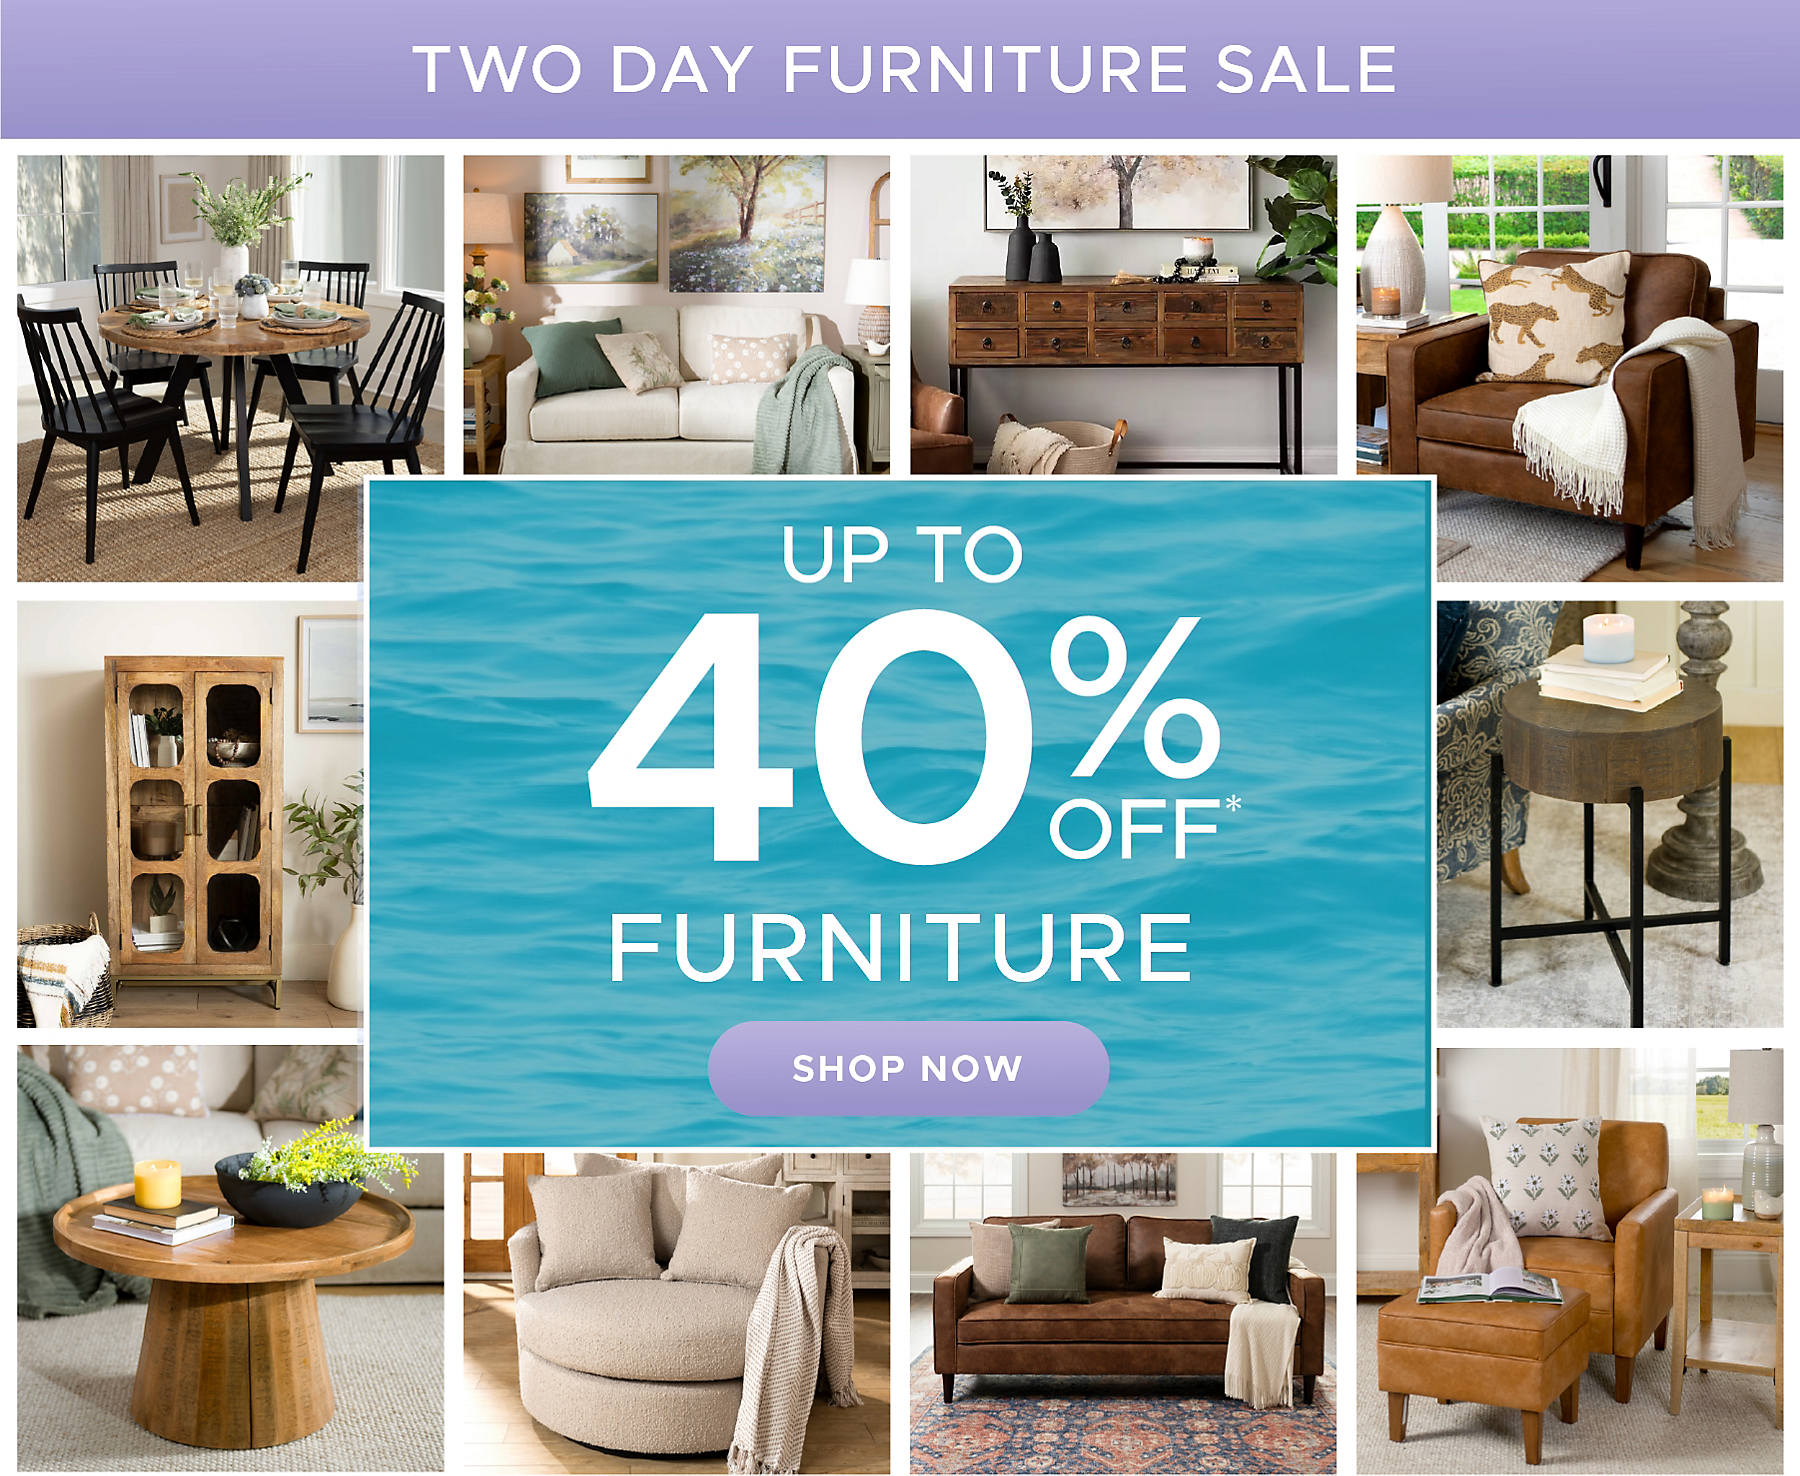 Two Day Furniture Sale up to 40% off* Furniture shop now